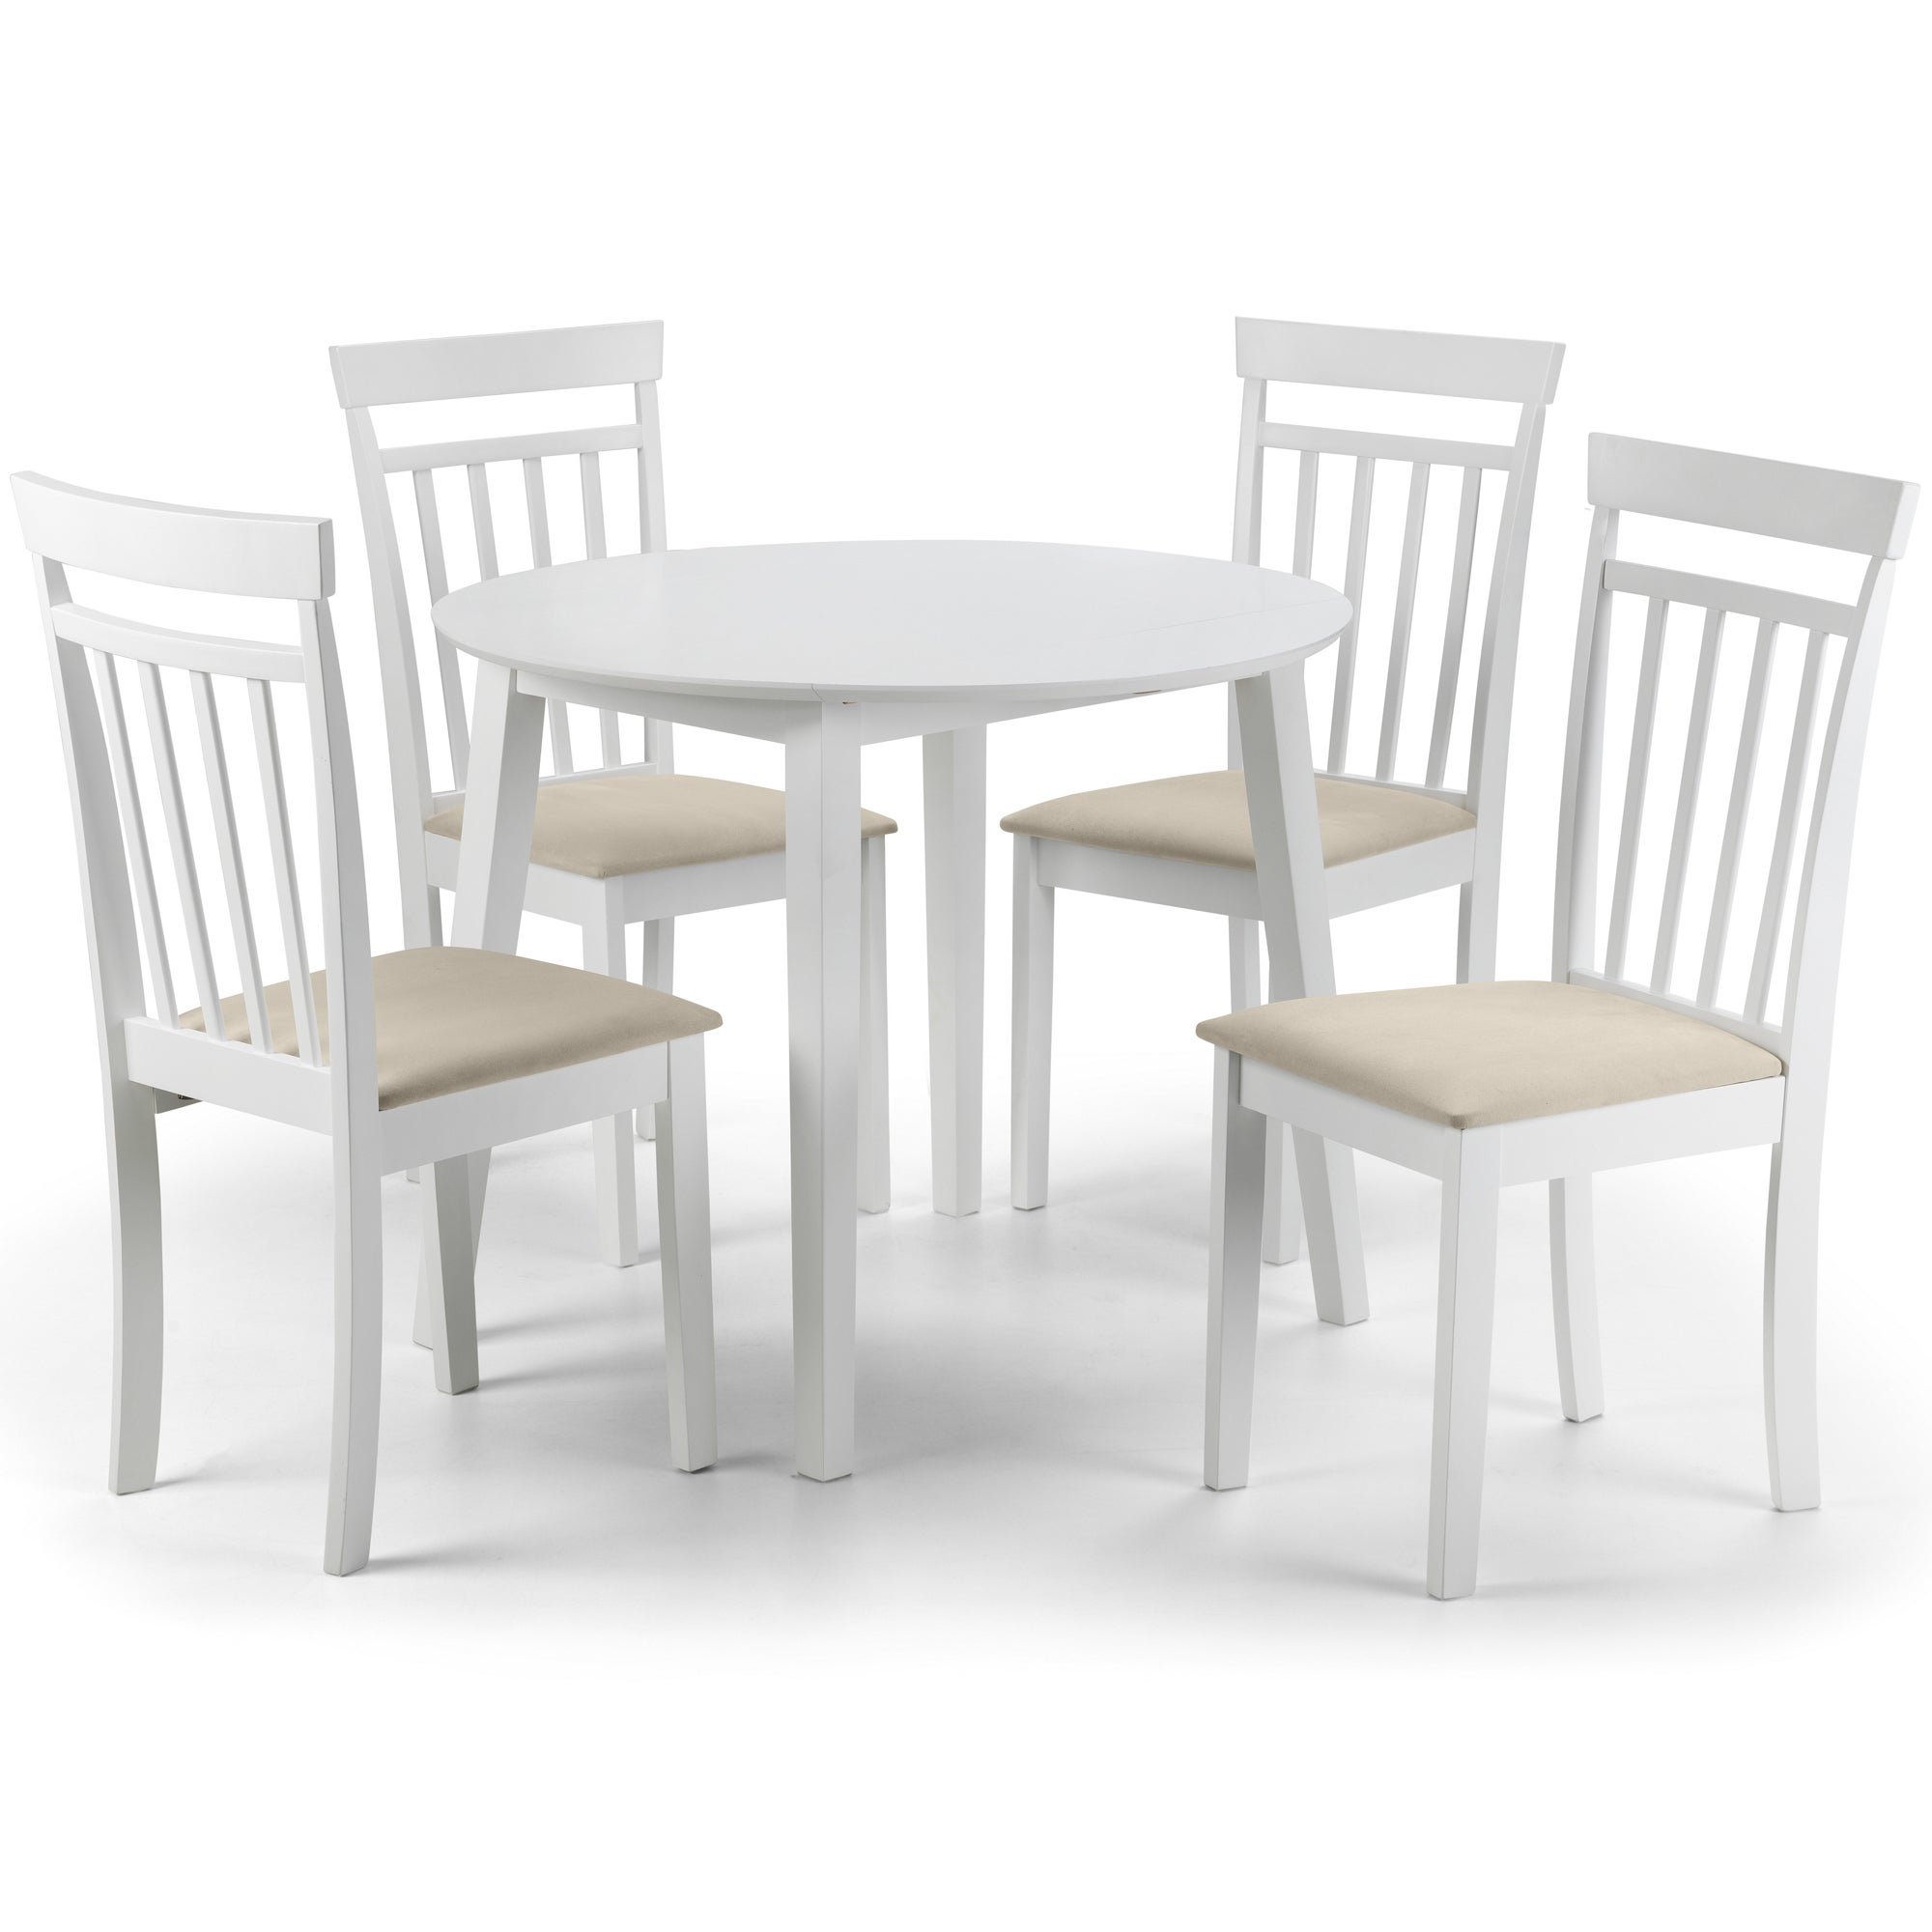 Coast Round Extendable Dining Table with 4 Chairs